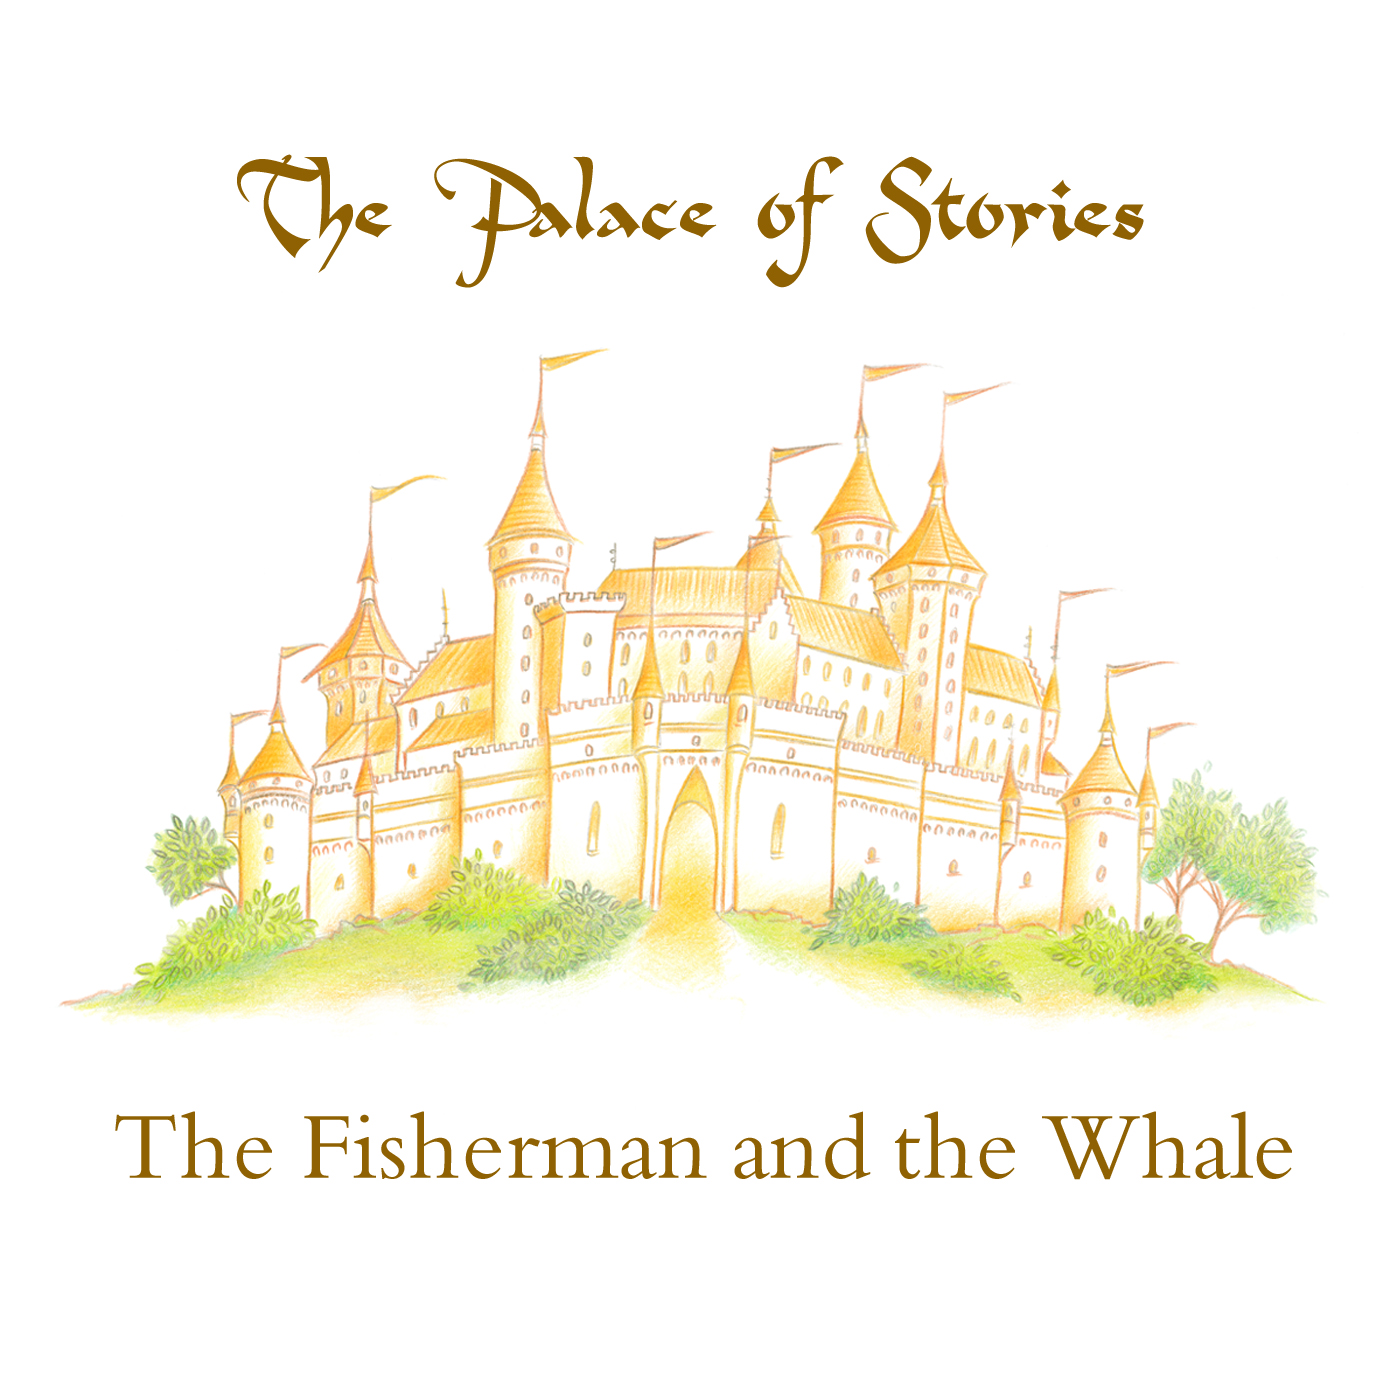 The Fisherman and the Whale